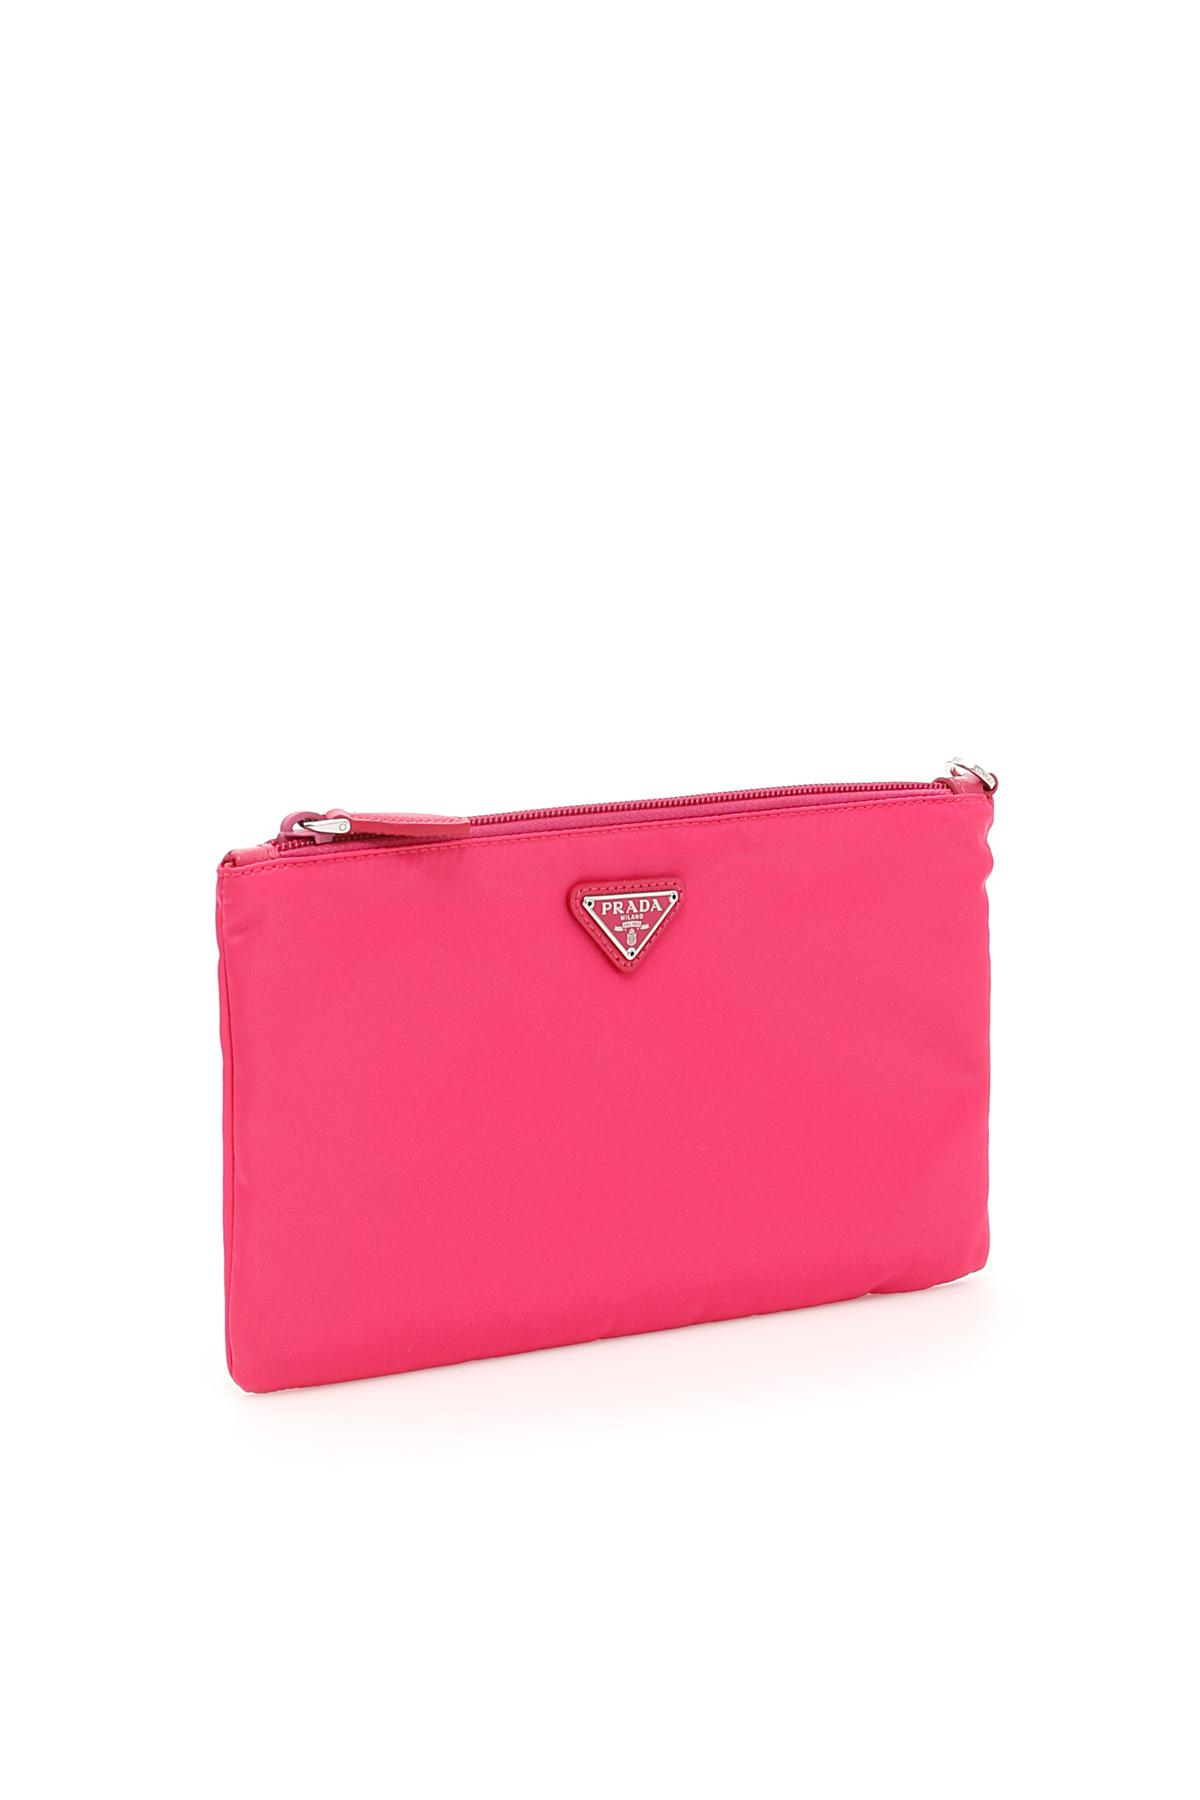 Prada Synthetic Nylon Flat Pouch in Pink - Lyst